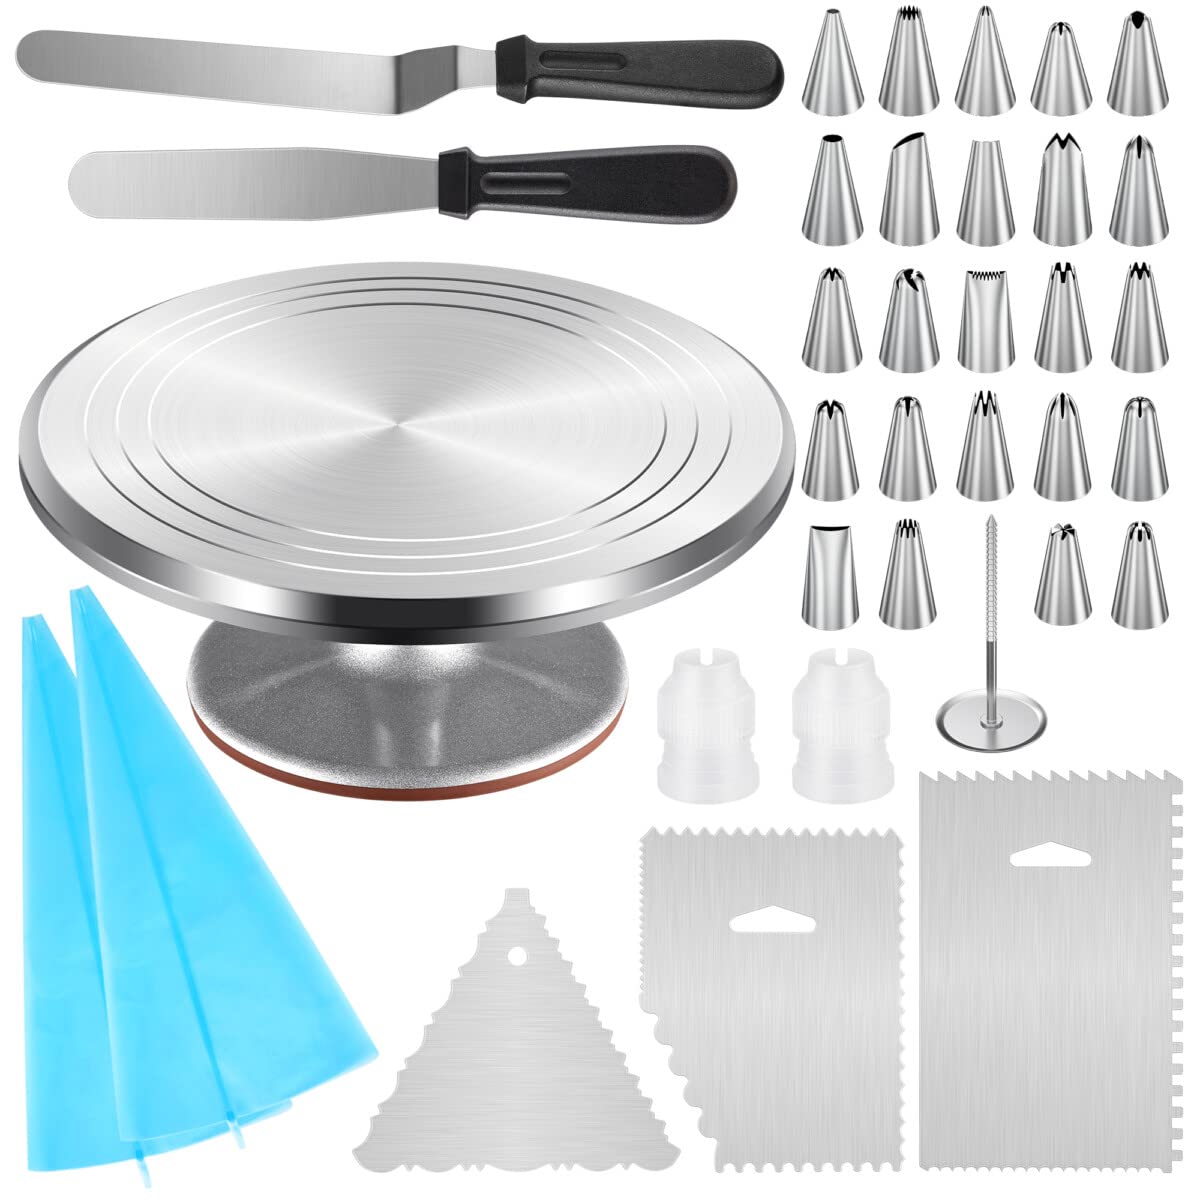 Kootek Aluminium cake Turntable, 12 Inch Rotating cake Stand, 35 pcs cake Decorating Kit Supplies with 24 Numbered Icing Piping 